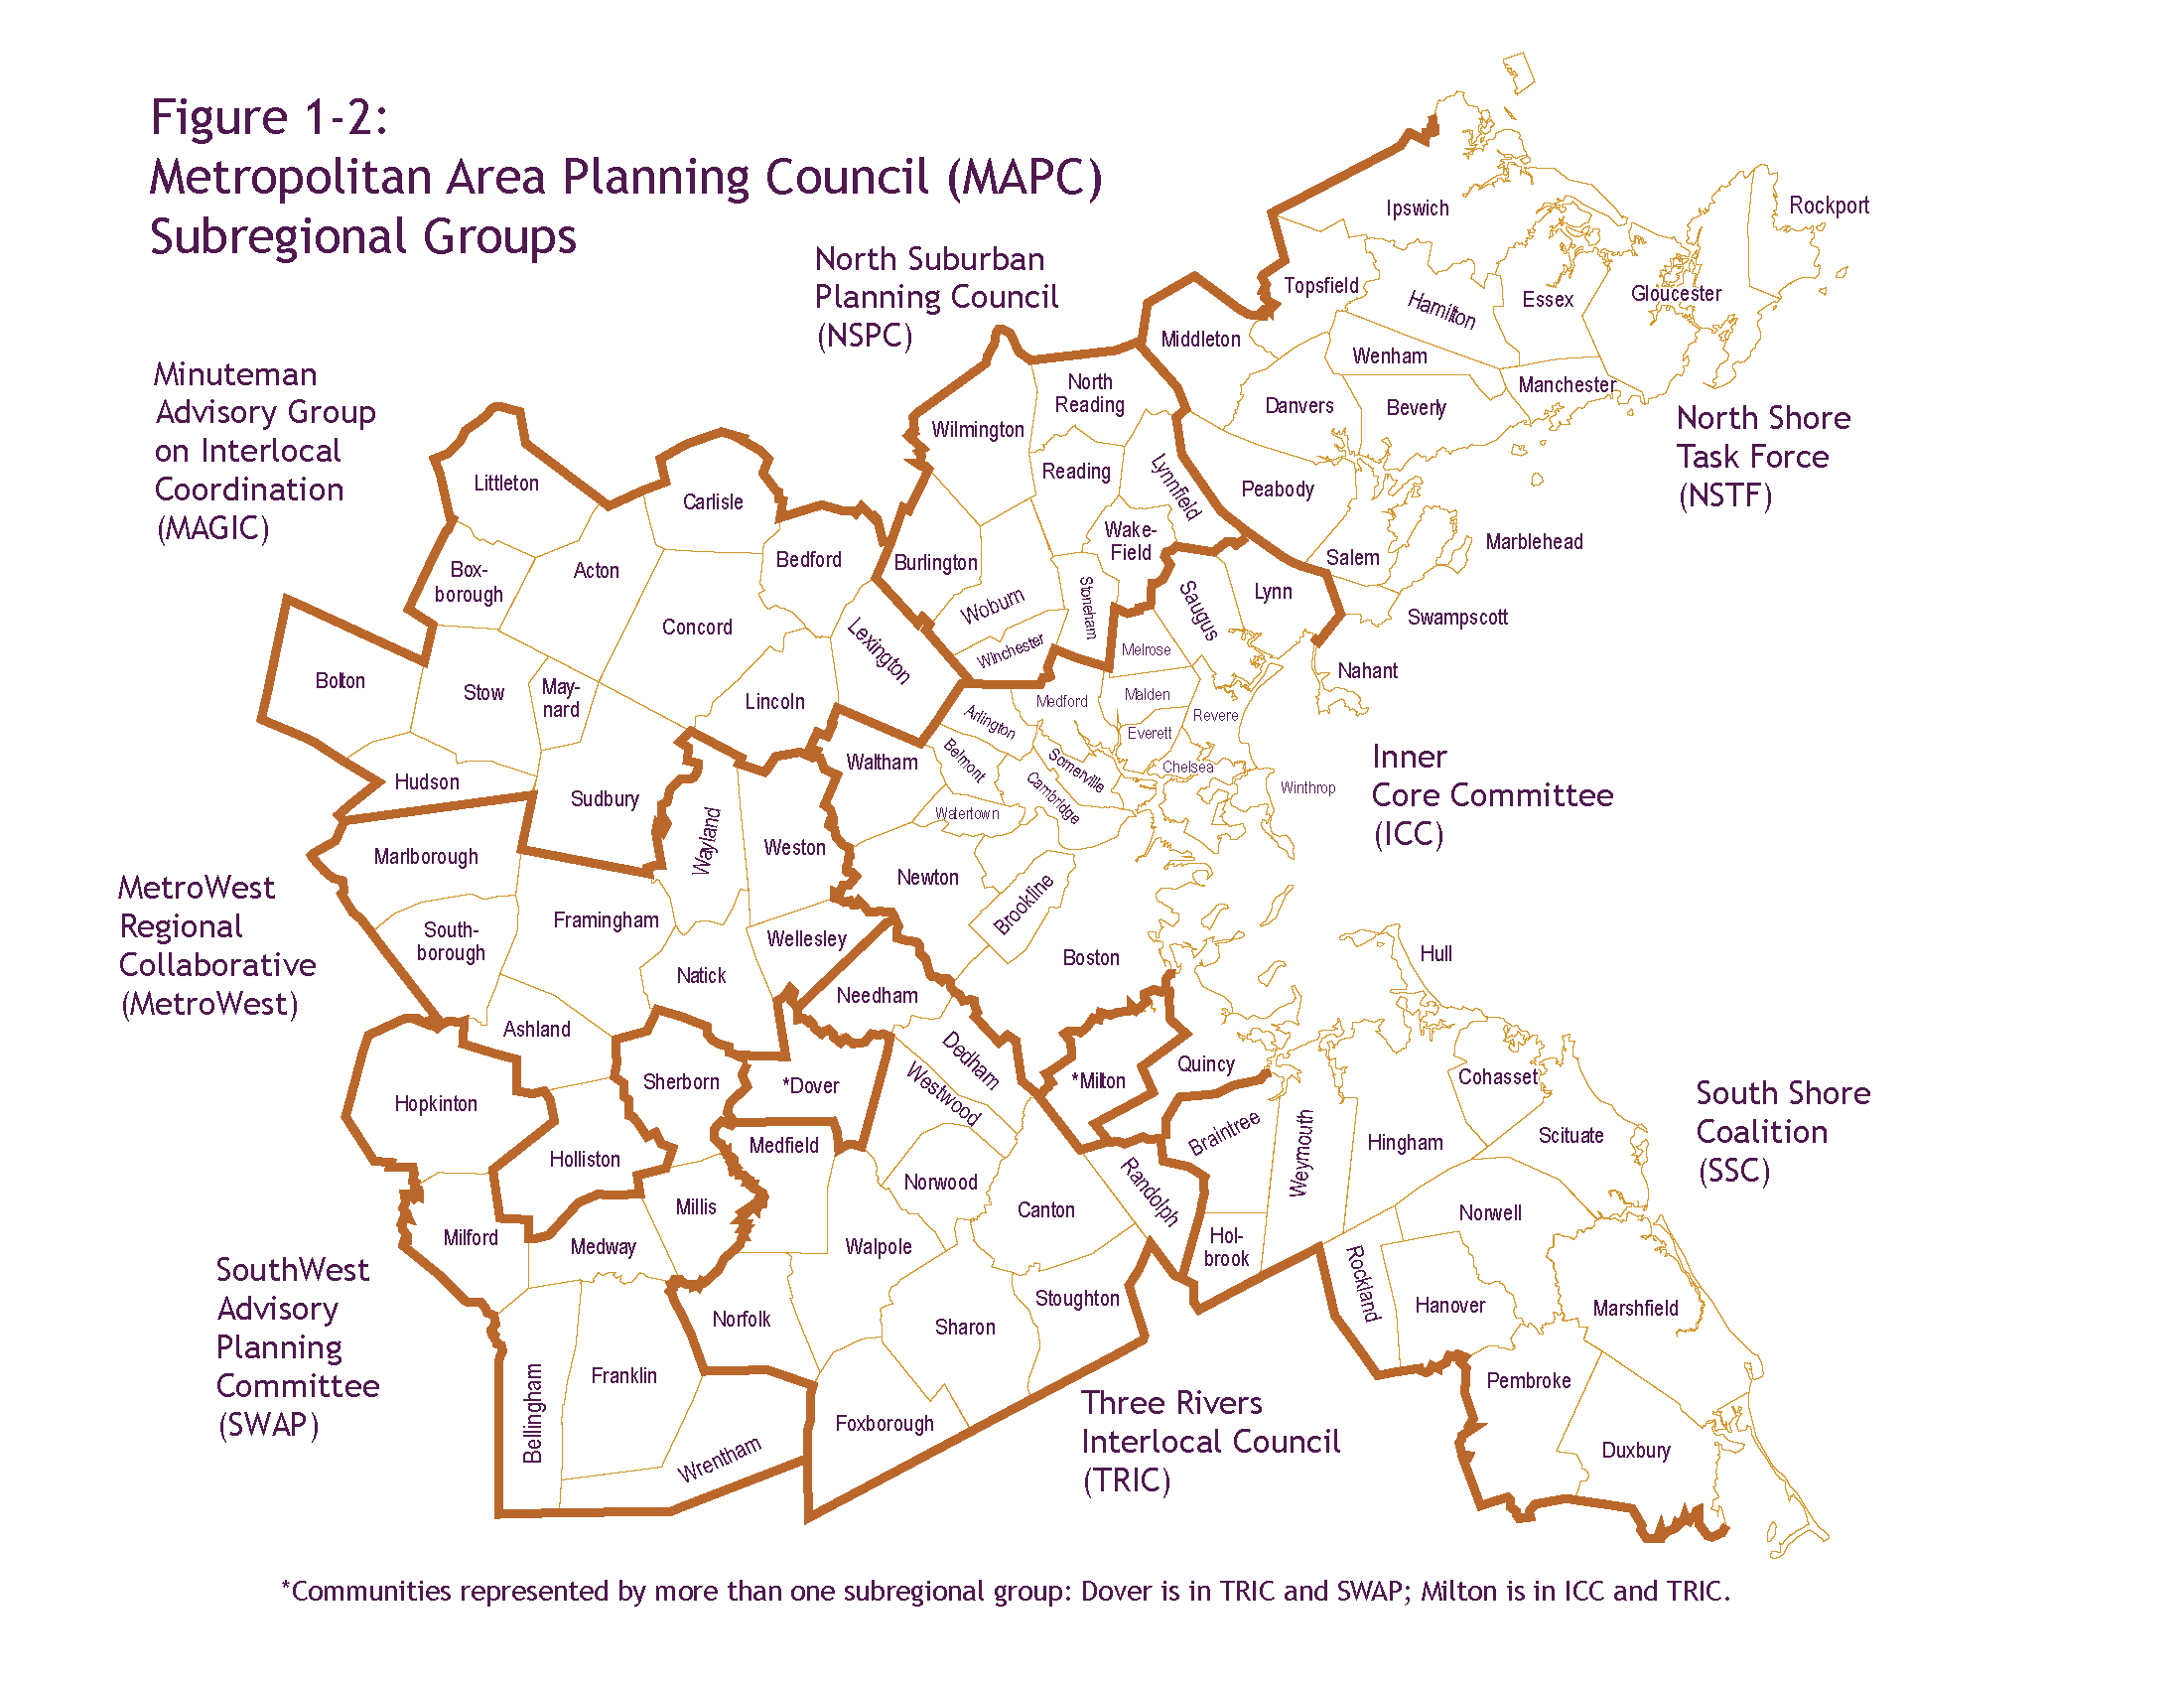 This figure shows the boundaries of the MAPC subregional groups within the Boston region. There are eight subregional groups: North Shore Task Force, North Suburban Planning Council, Minuteman Advisory Group on Interlocal Coordination, MetroWest Regional Collaborative, SouthWest Advisory Planning Committee, Three Rivers Interlocal Council, South Shore Coalition, and Inner Core Committee.